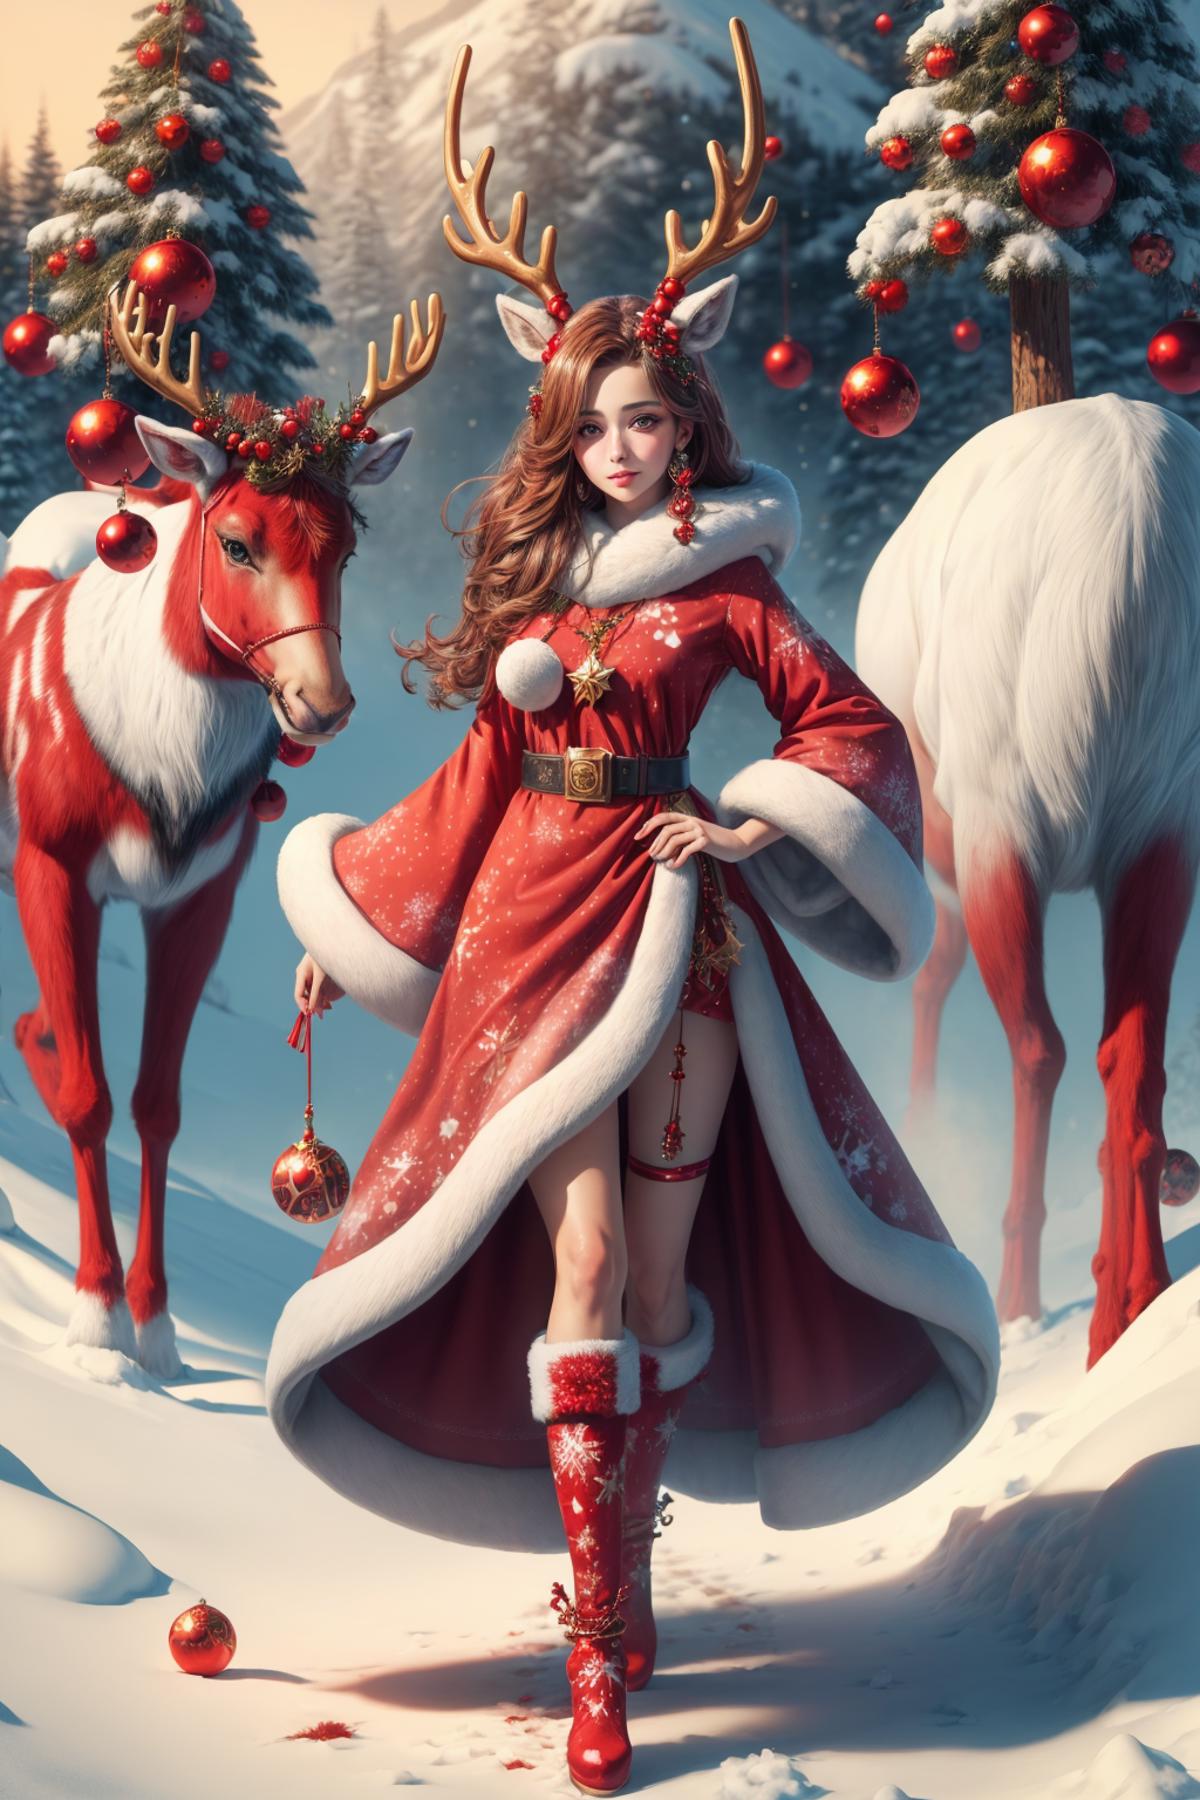 A woman dressed in a Christmas outfit posing with deer in a snowy scene.